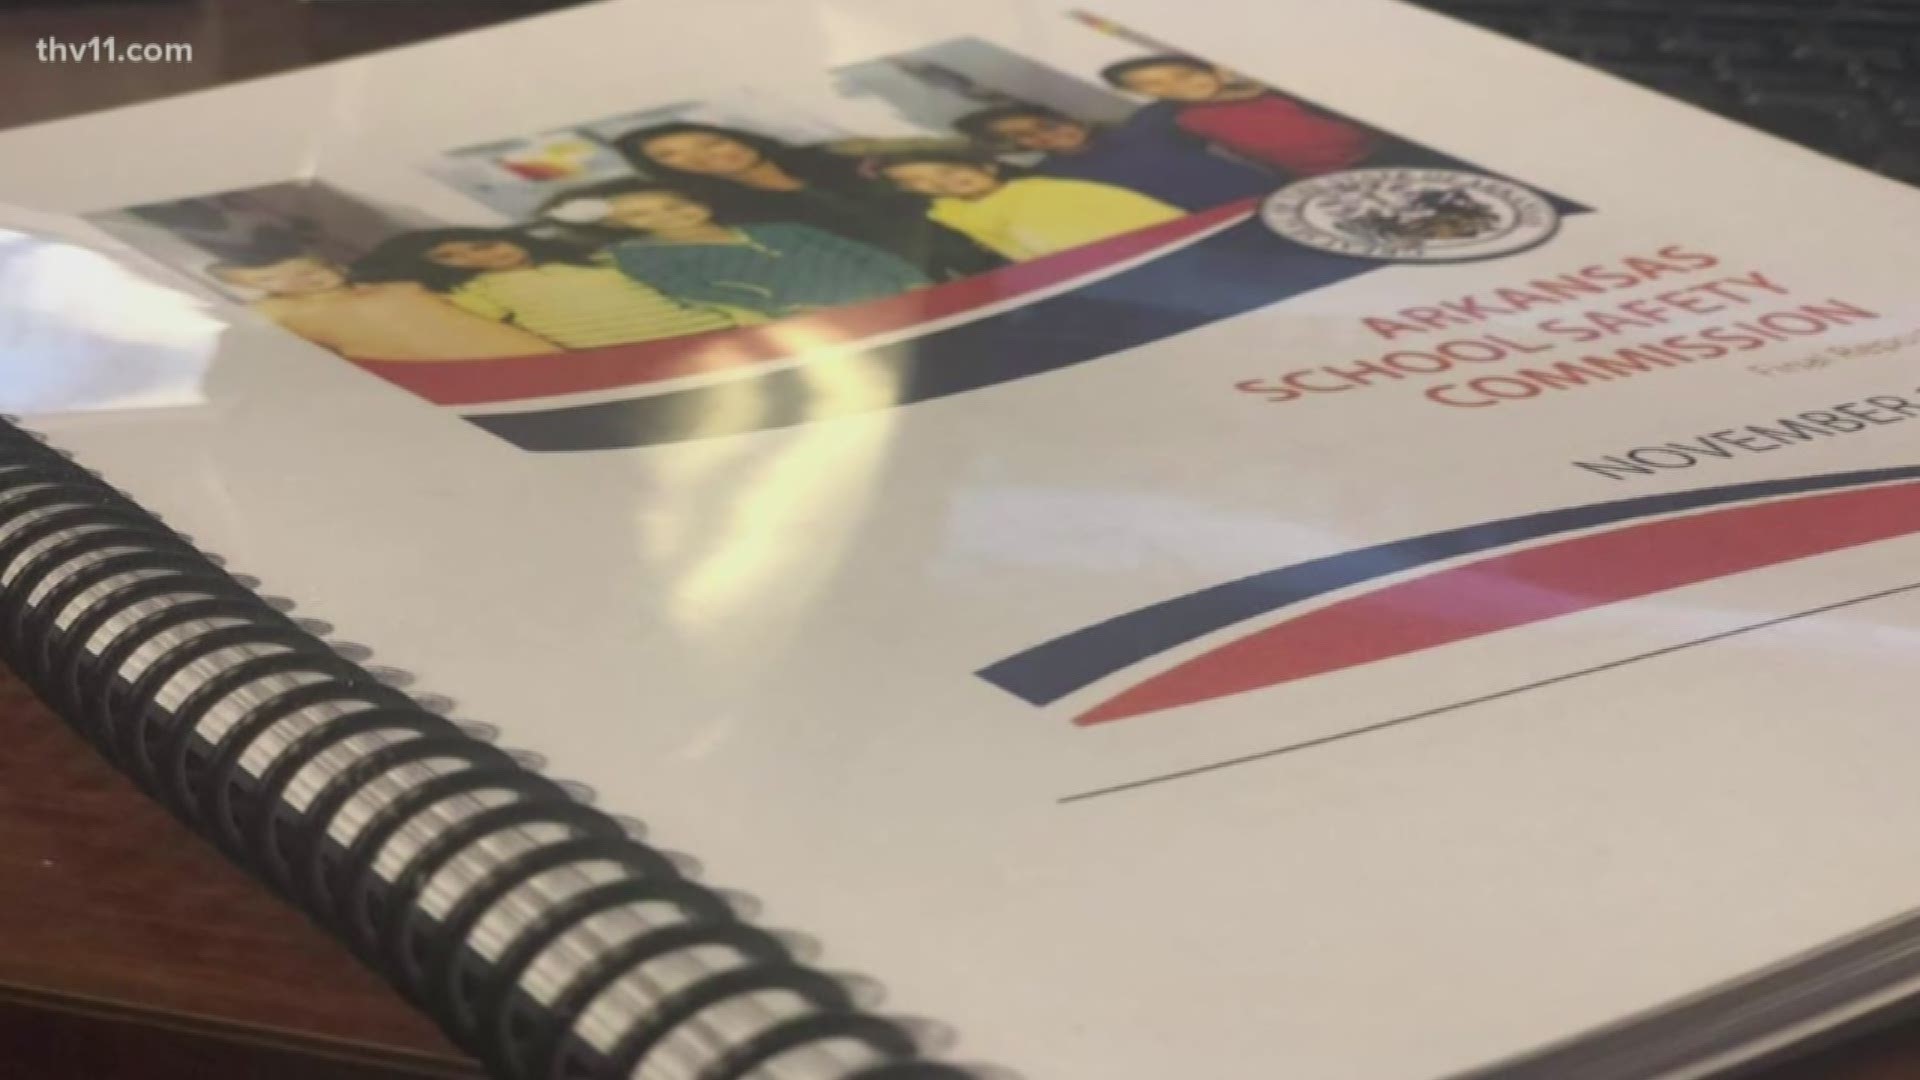 Today the Arkansas School Safety Commission gave Governor Asa Hutchinson their final report. It outlines what needs to be done to keep students safe.